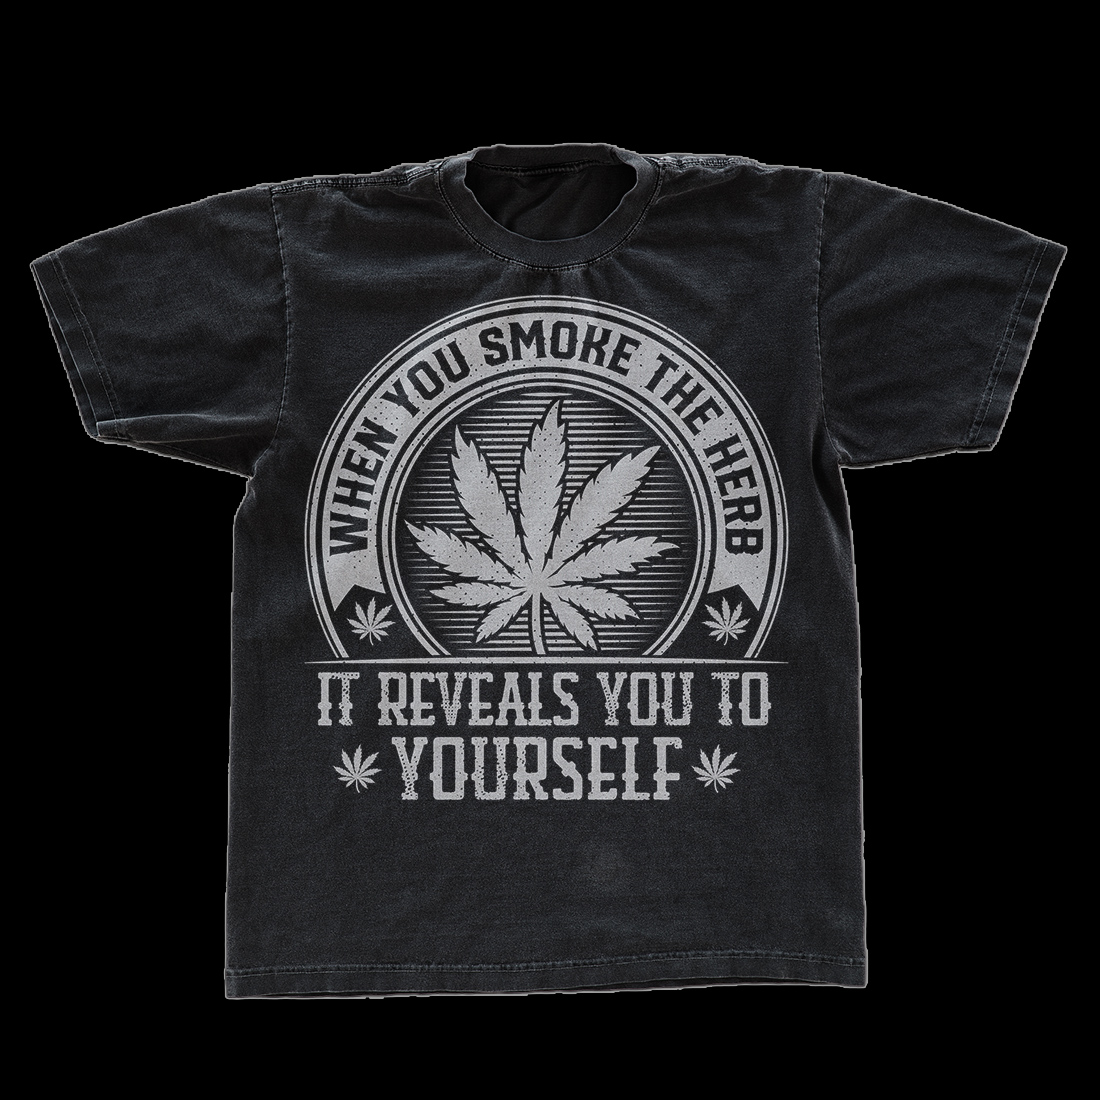 Black t - shirt that says when you smoke there it reveals you to yourself.